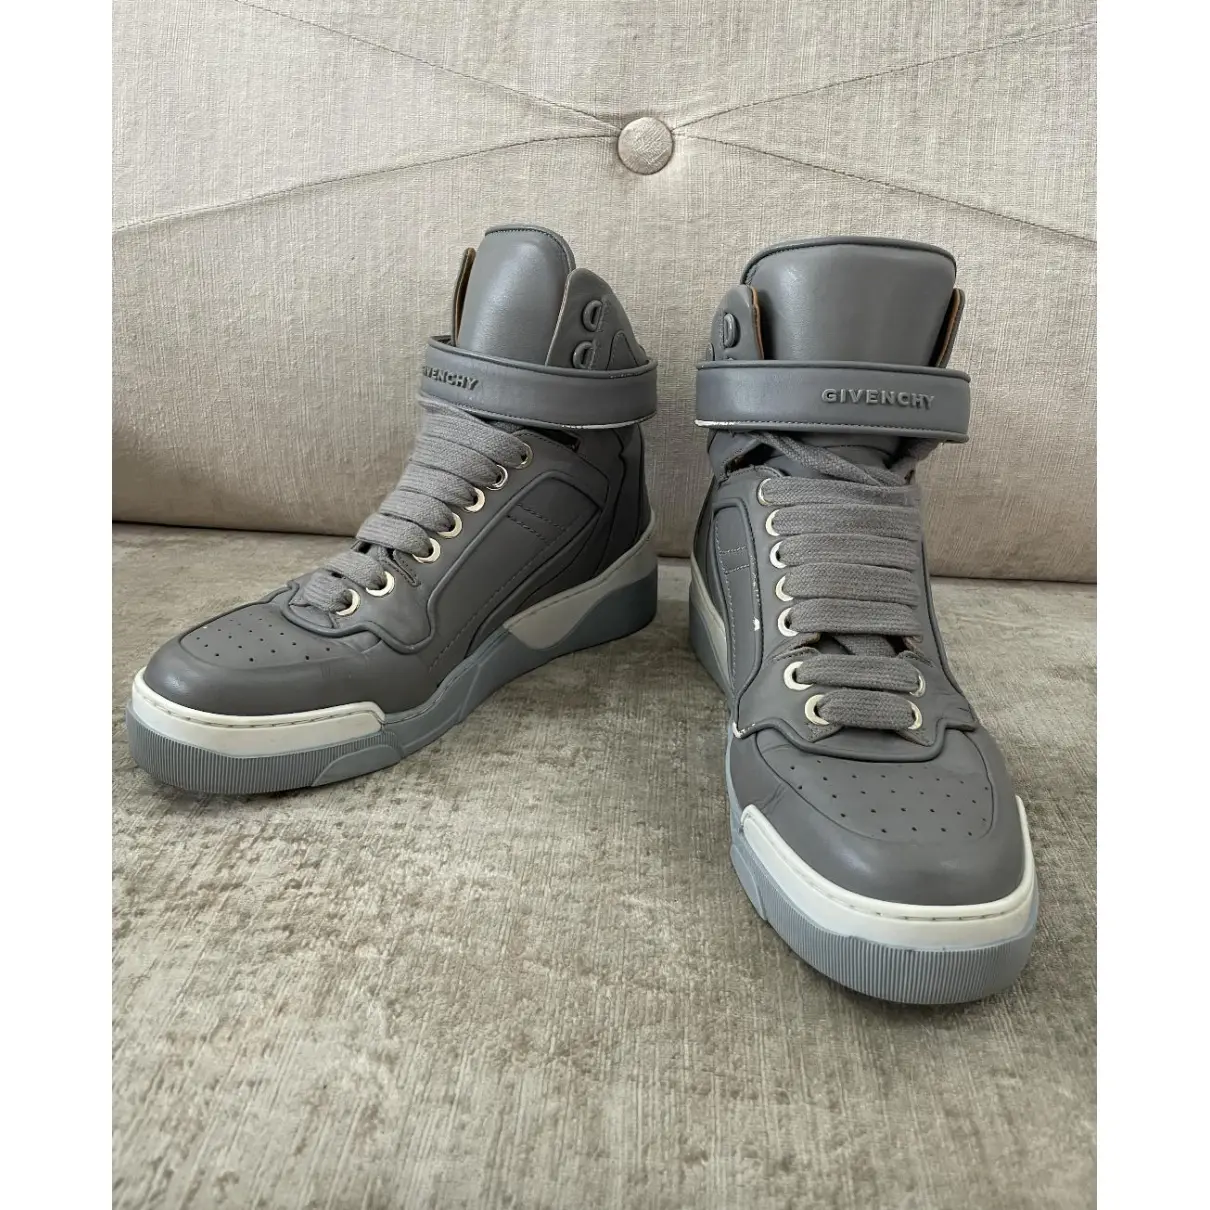 Buy Givenchy Tyson leather high trainers online